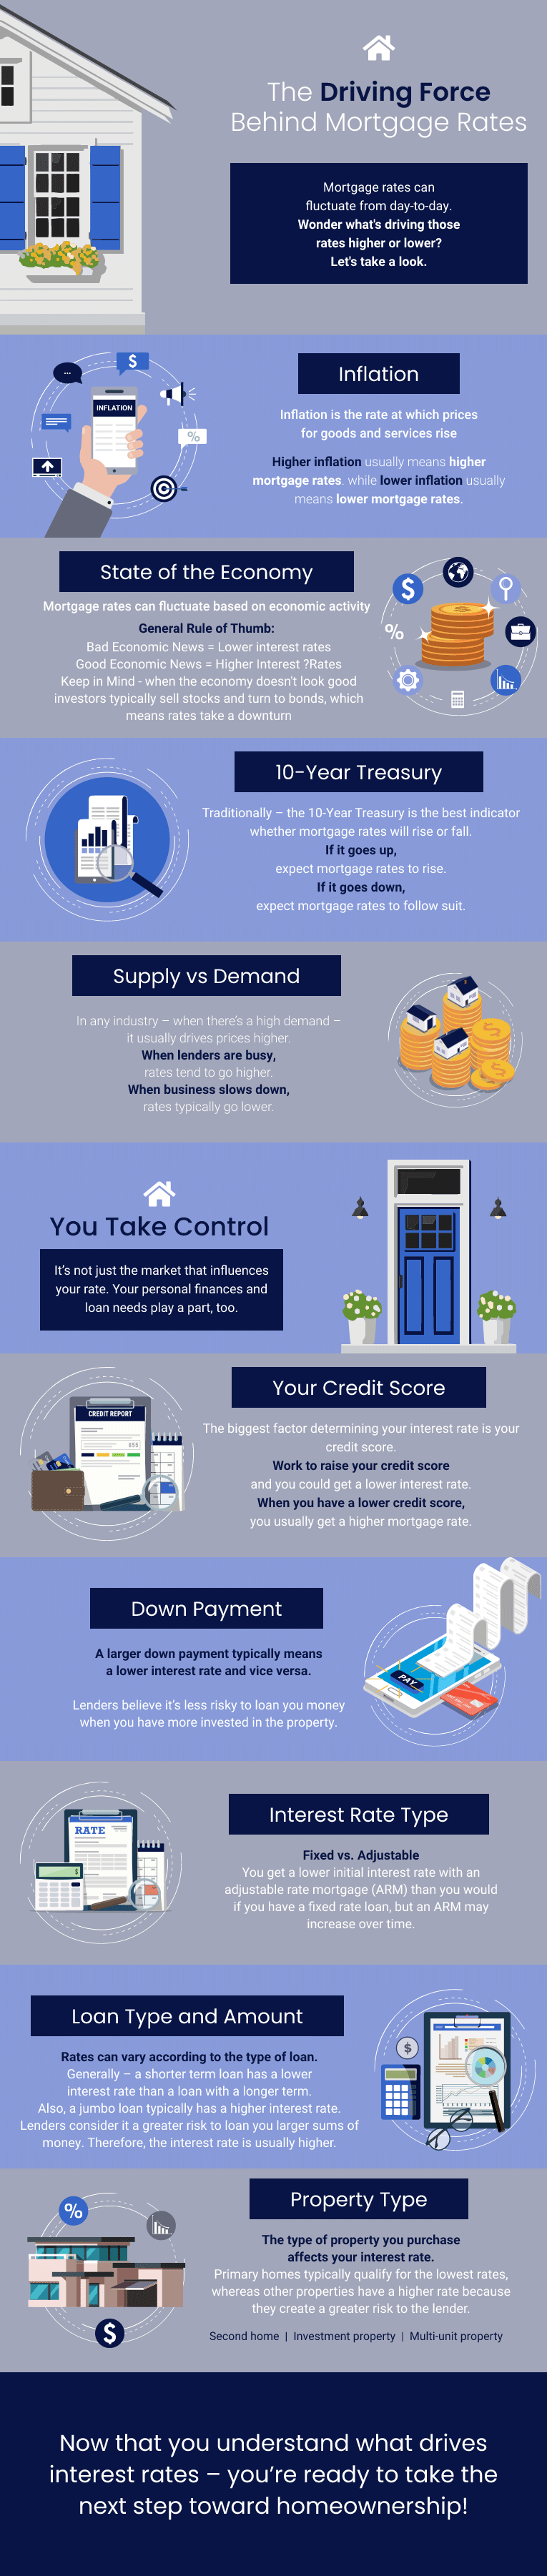 The Driving Force Behind Mortgage Rates Infographic